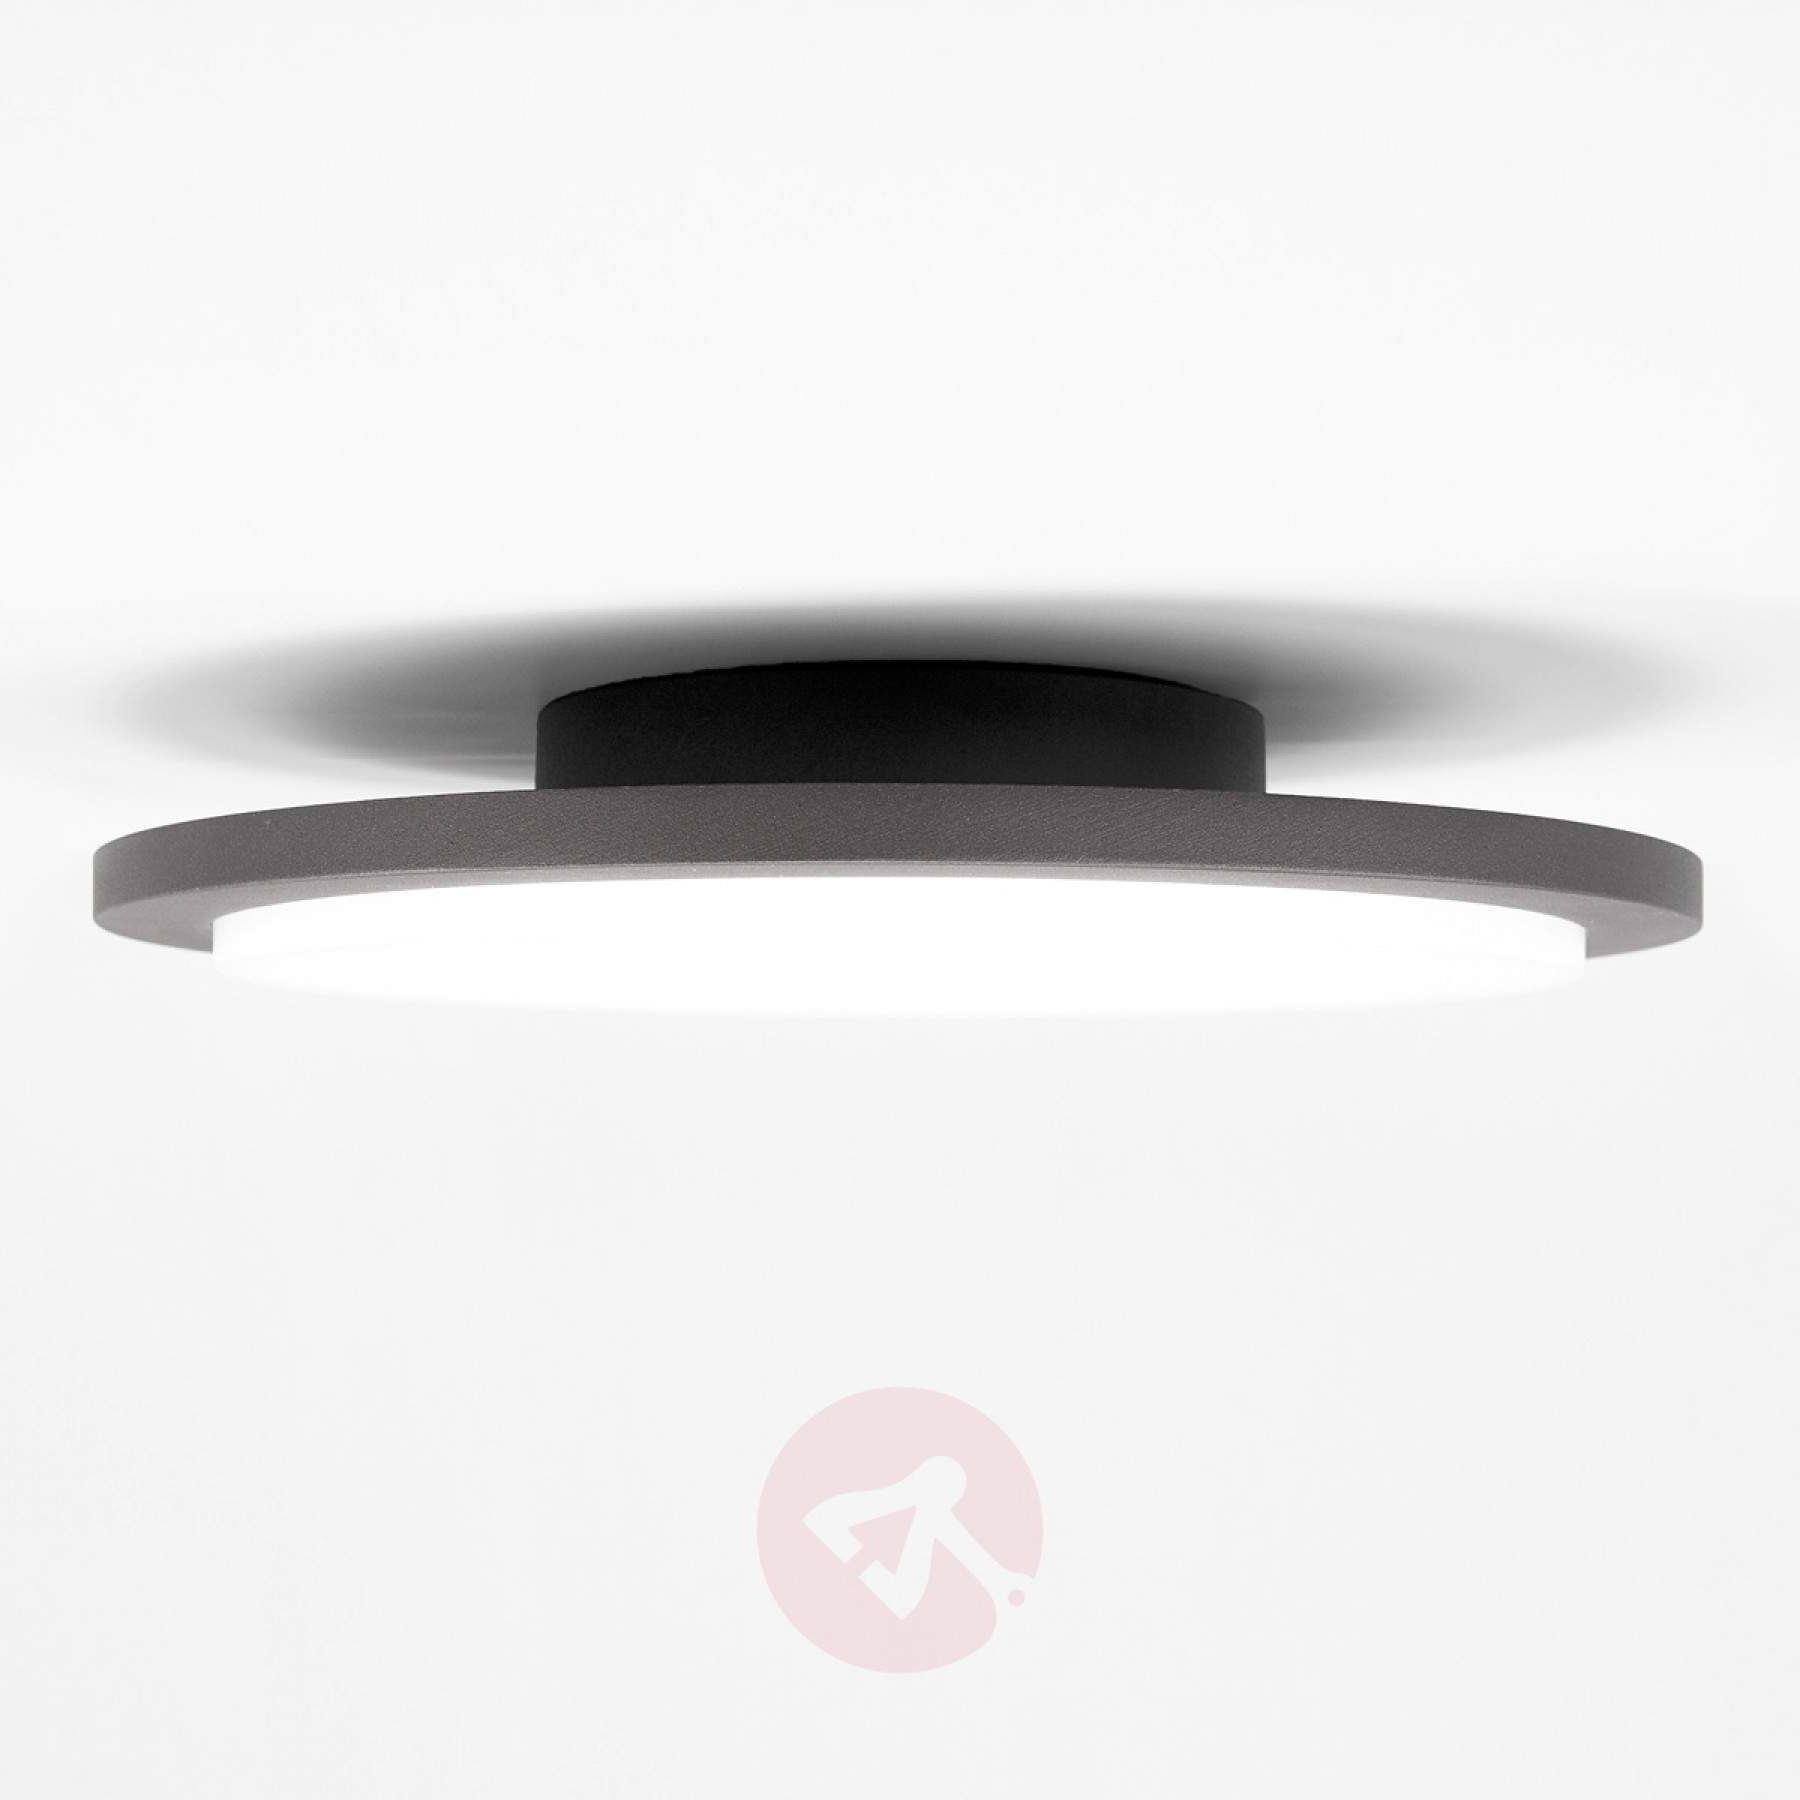 Newest Benton – Led Outdoor Ceiling Light With Sensor (View 13 of 20)